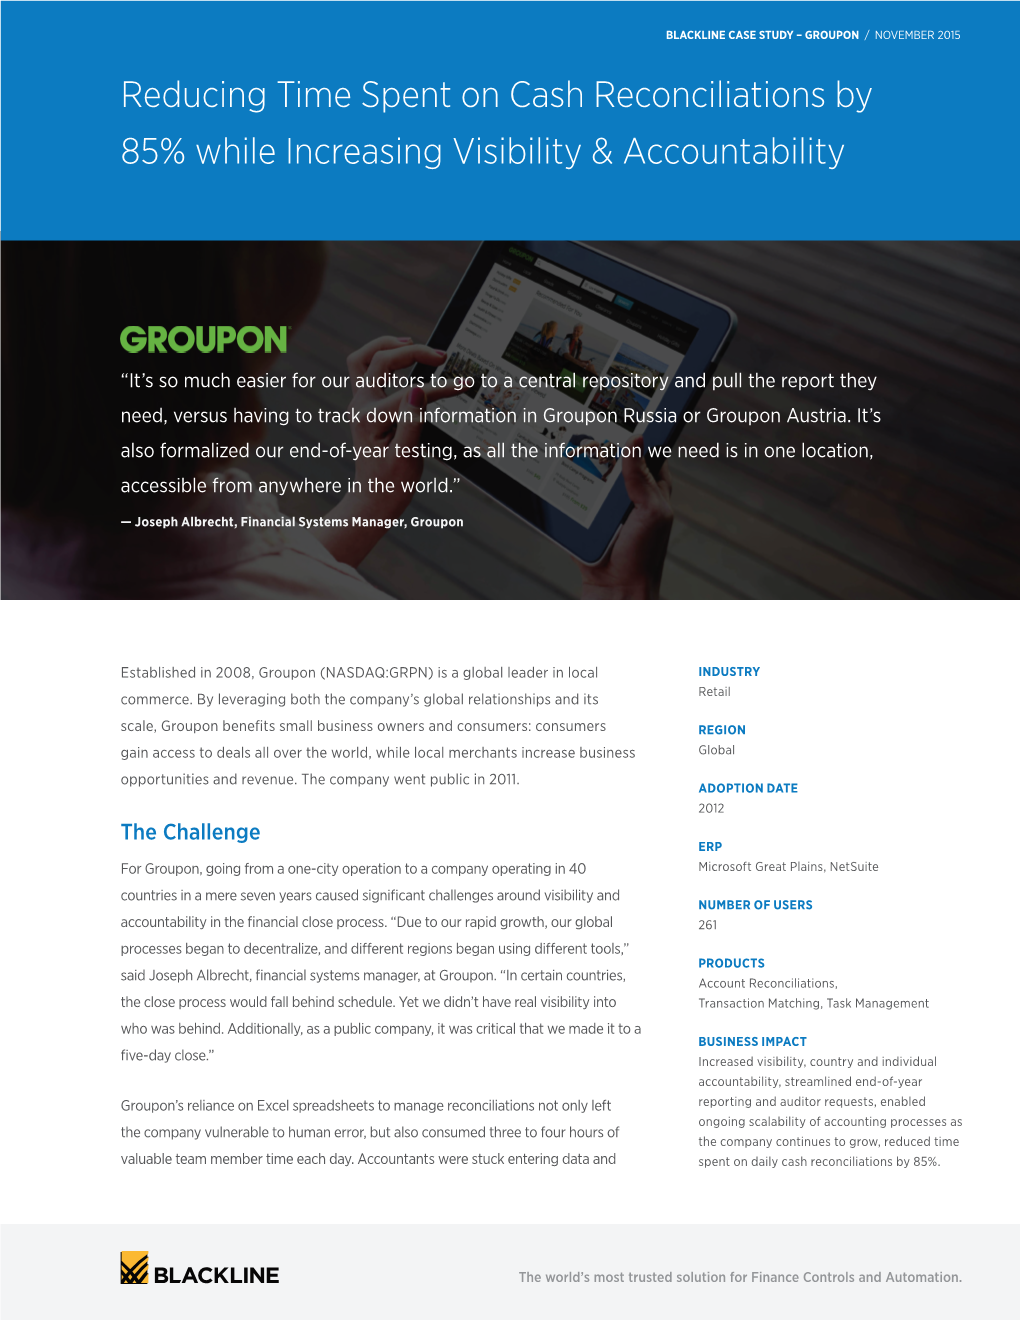 Reducing Time Spent on Cash Reconciliations by 85% While Increasing Visibility & Accountability